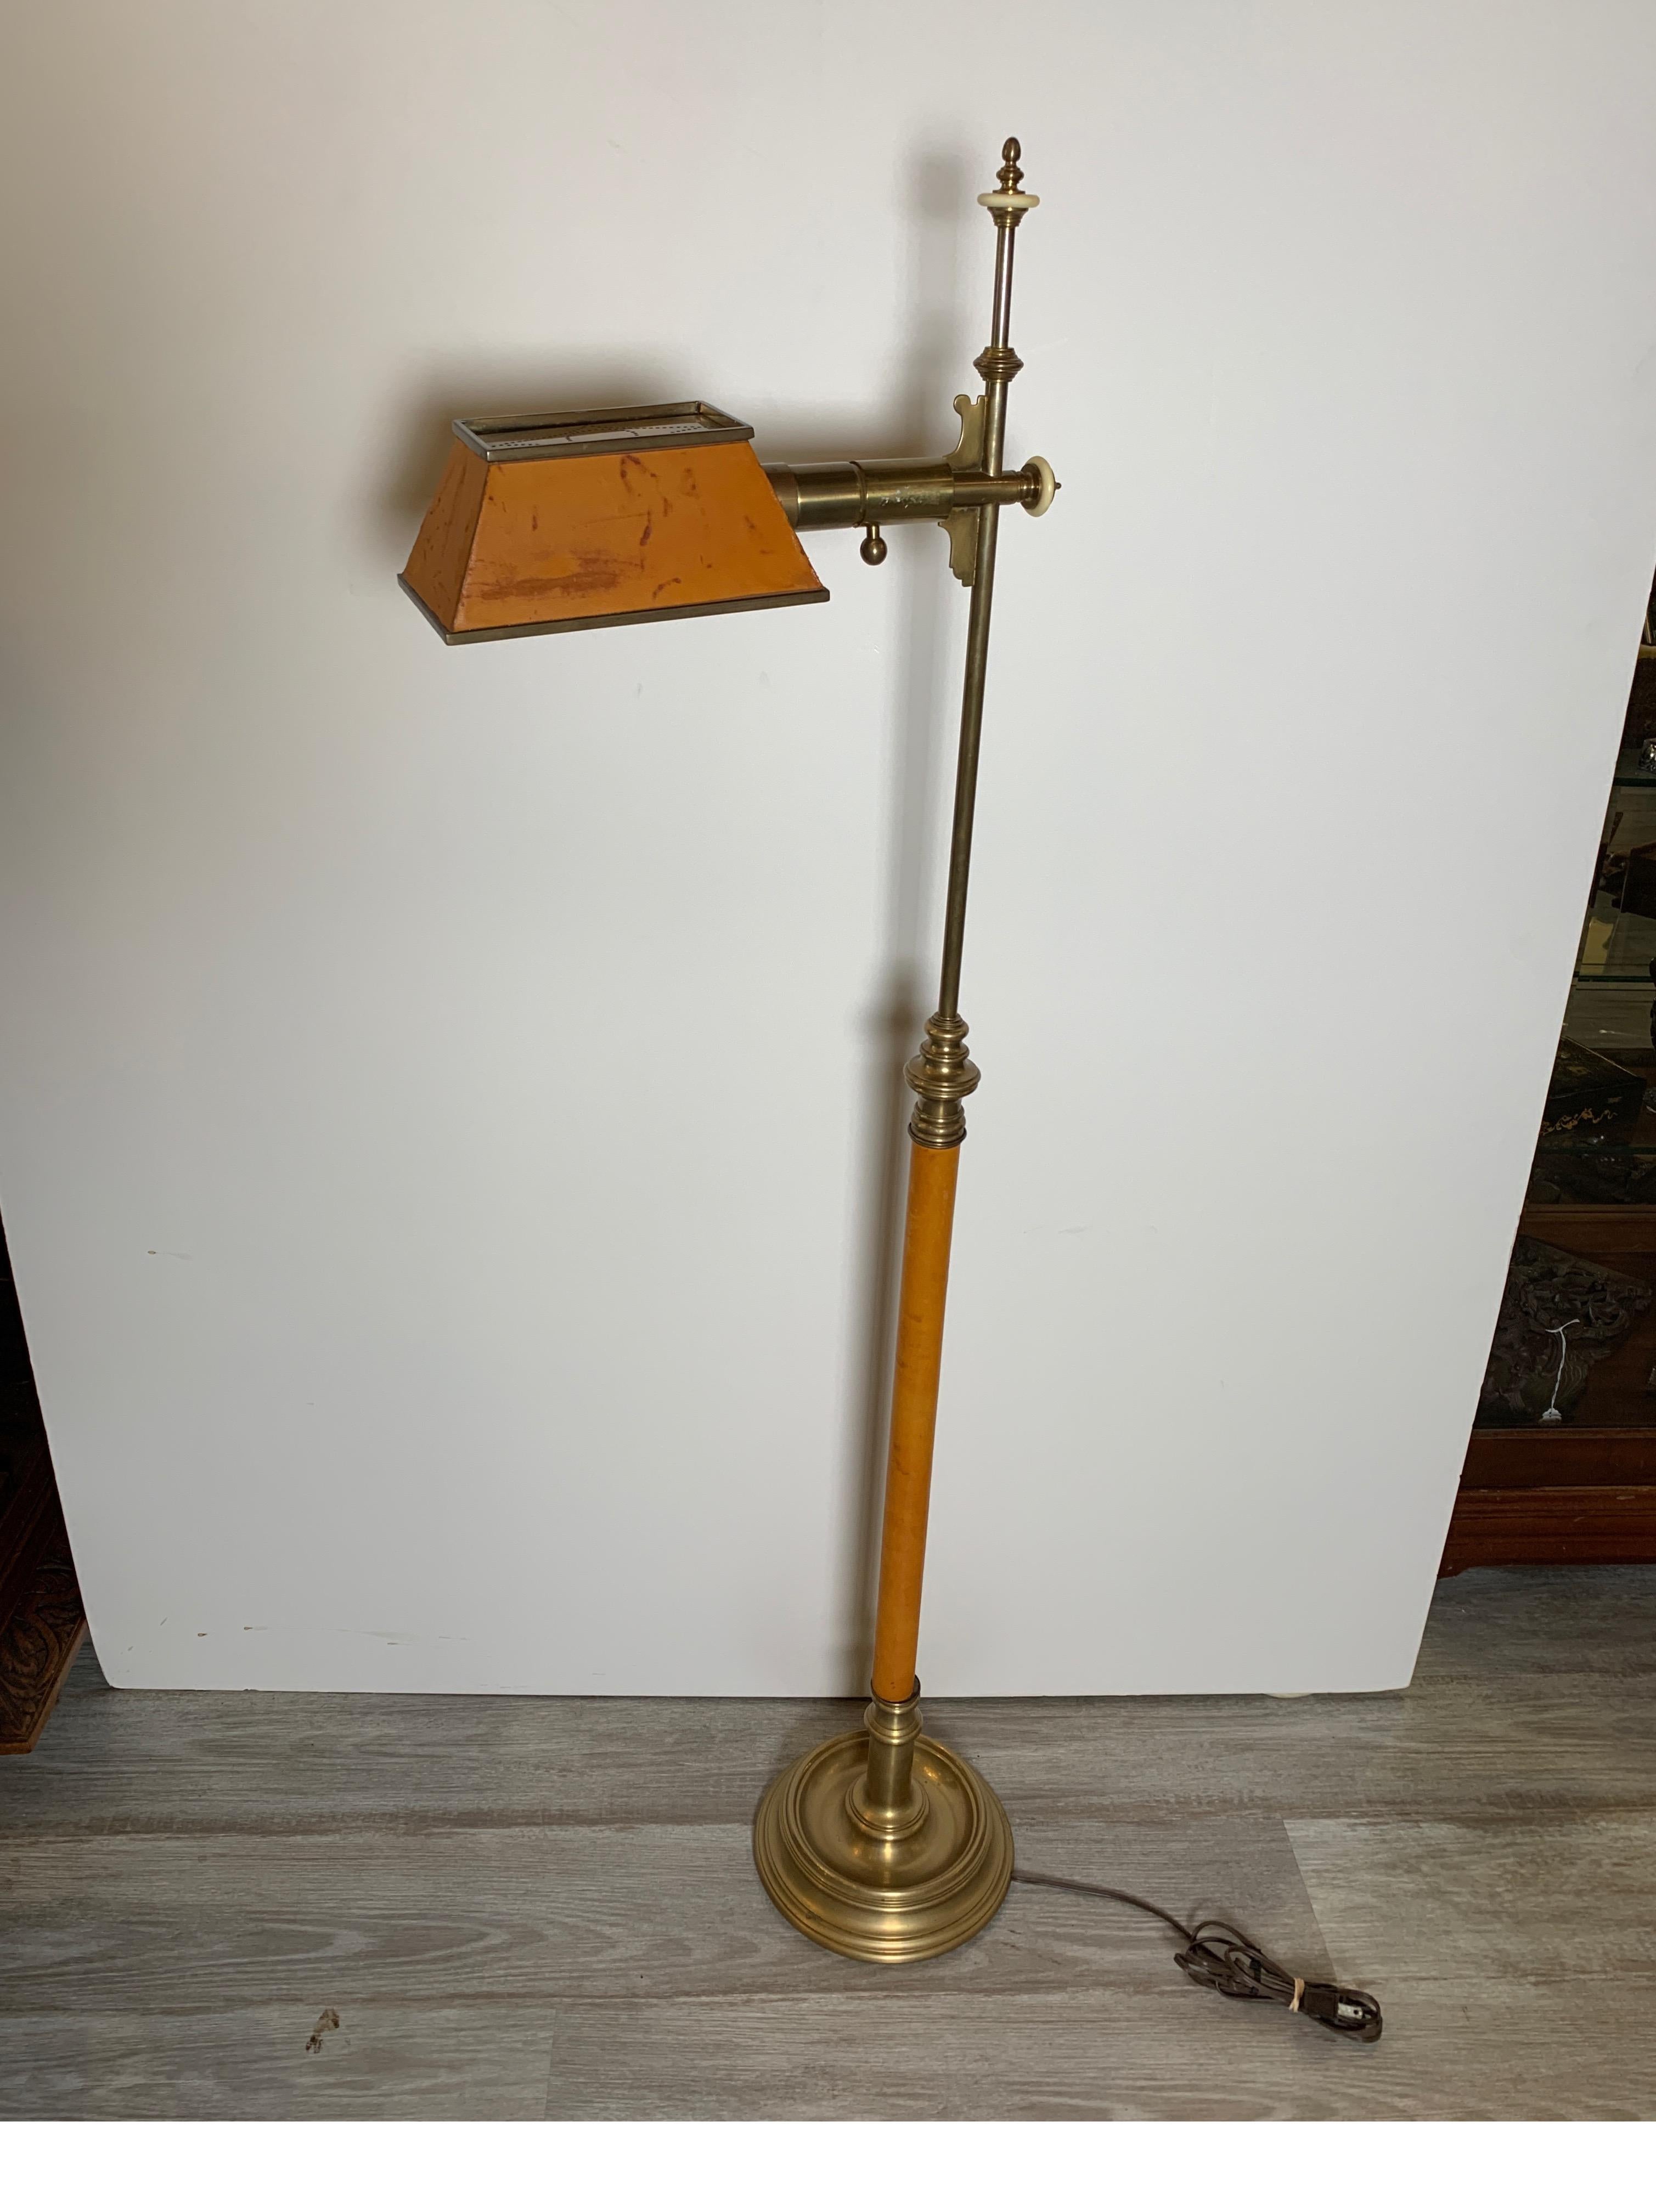 Stylish aged brass floor lamp with leather covered shade and center pole. The cast brass lamp with tapered rectangular shade with top light diffuse supported by a leather wrapped center pole resting on a round molded base. Marked Chapman.